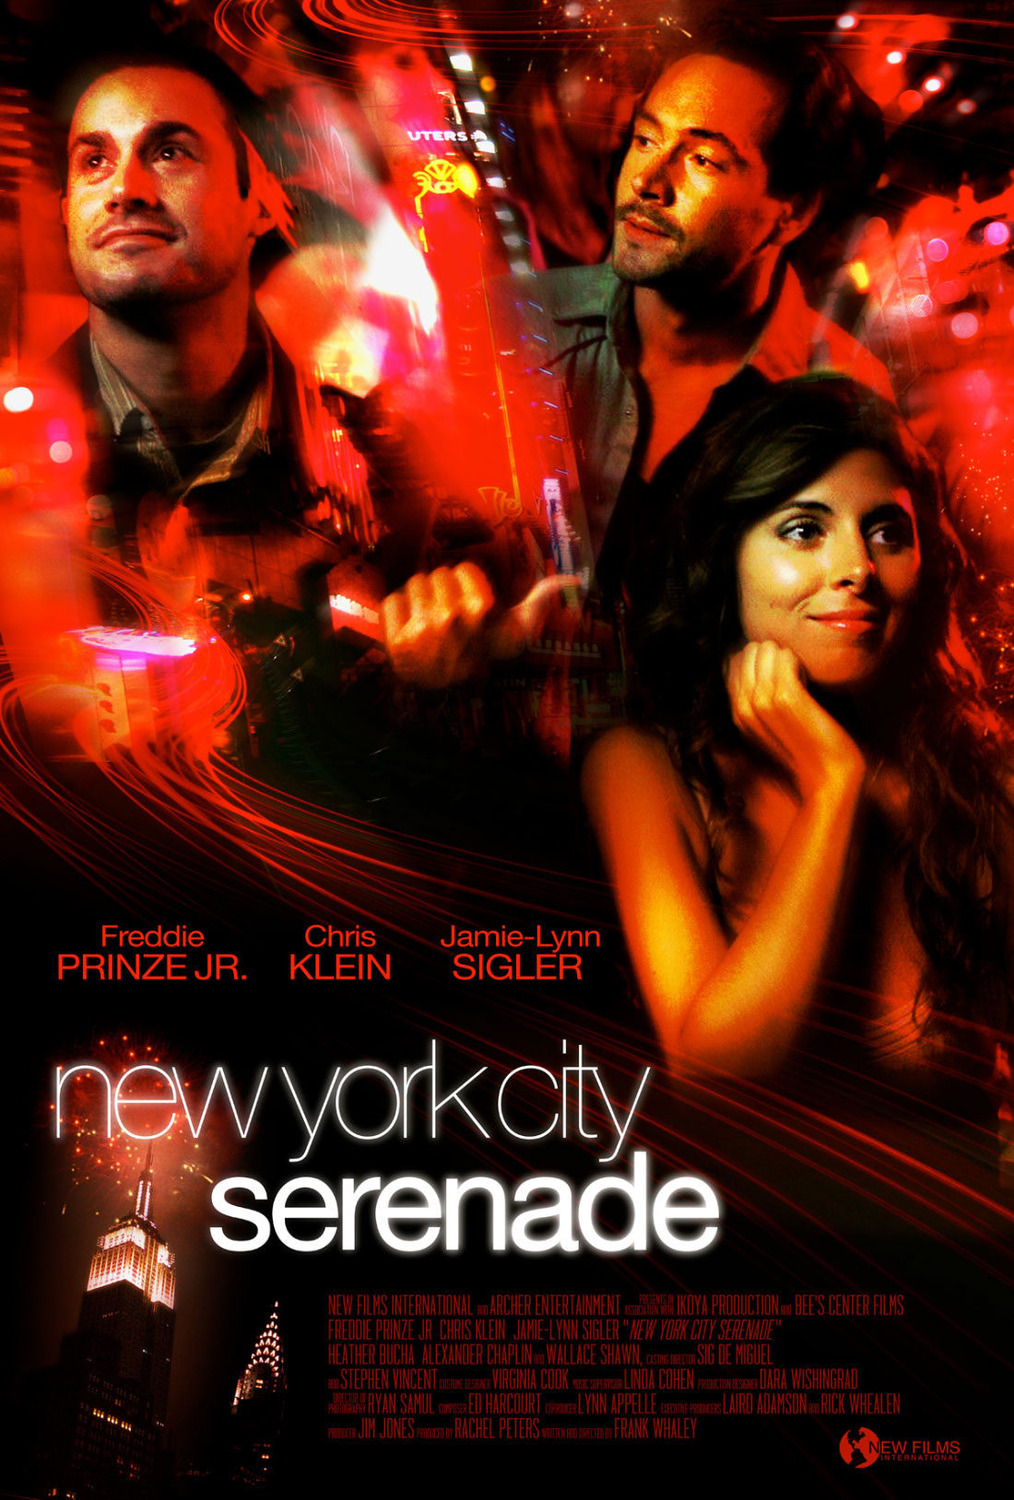 Extra Large Movie Poster Image for New York City Serenade 